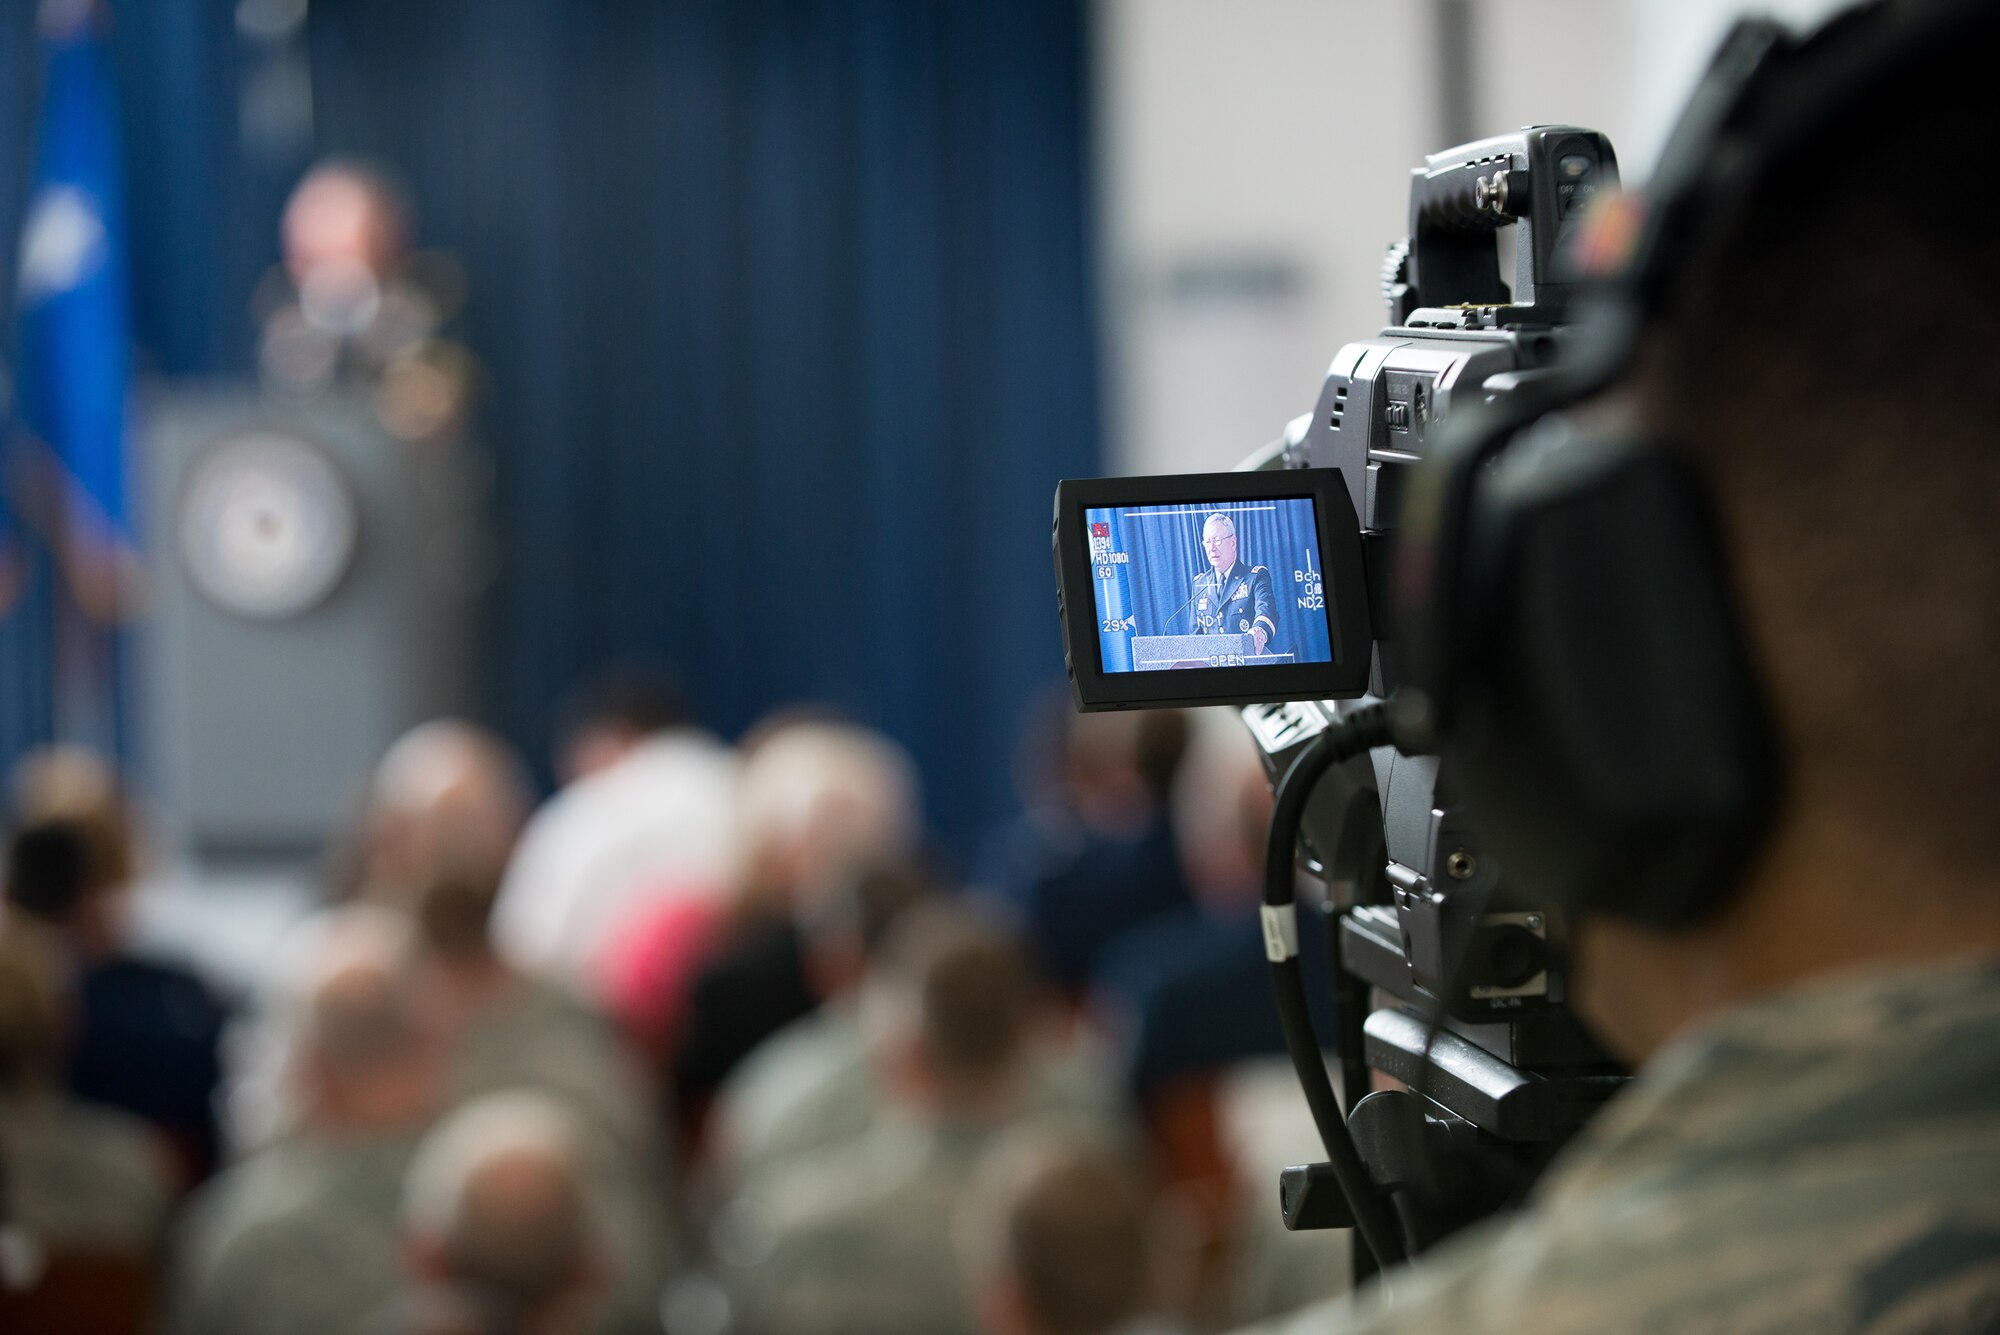 Tech. Sgt. Erik Gallion, a broadcaster assigned to the I.G. Brown Training and Education Center, operates a camera May 10, 2016, at the Air National Guard Readiness Center on Joint Base Andrews, Md., while Chief of the National Guard Bureau Army Gen. Frank J. Grass speaks during the assumption of command ceremony for the Director of the Air National Guard. (U.S. Air National Guard photo by Tech. Sgt. Jonathan Young/Released)
